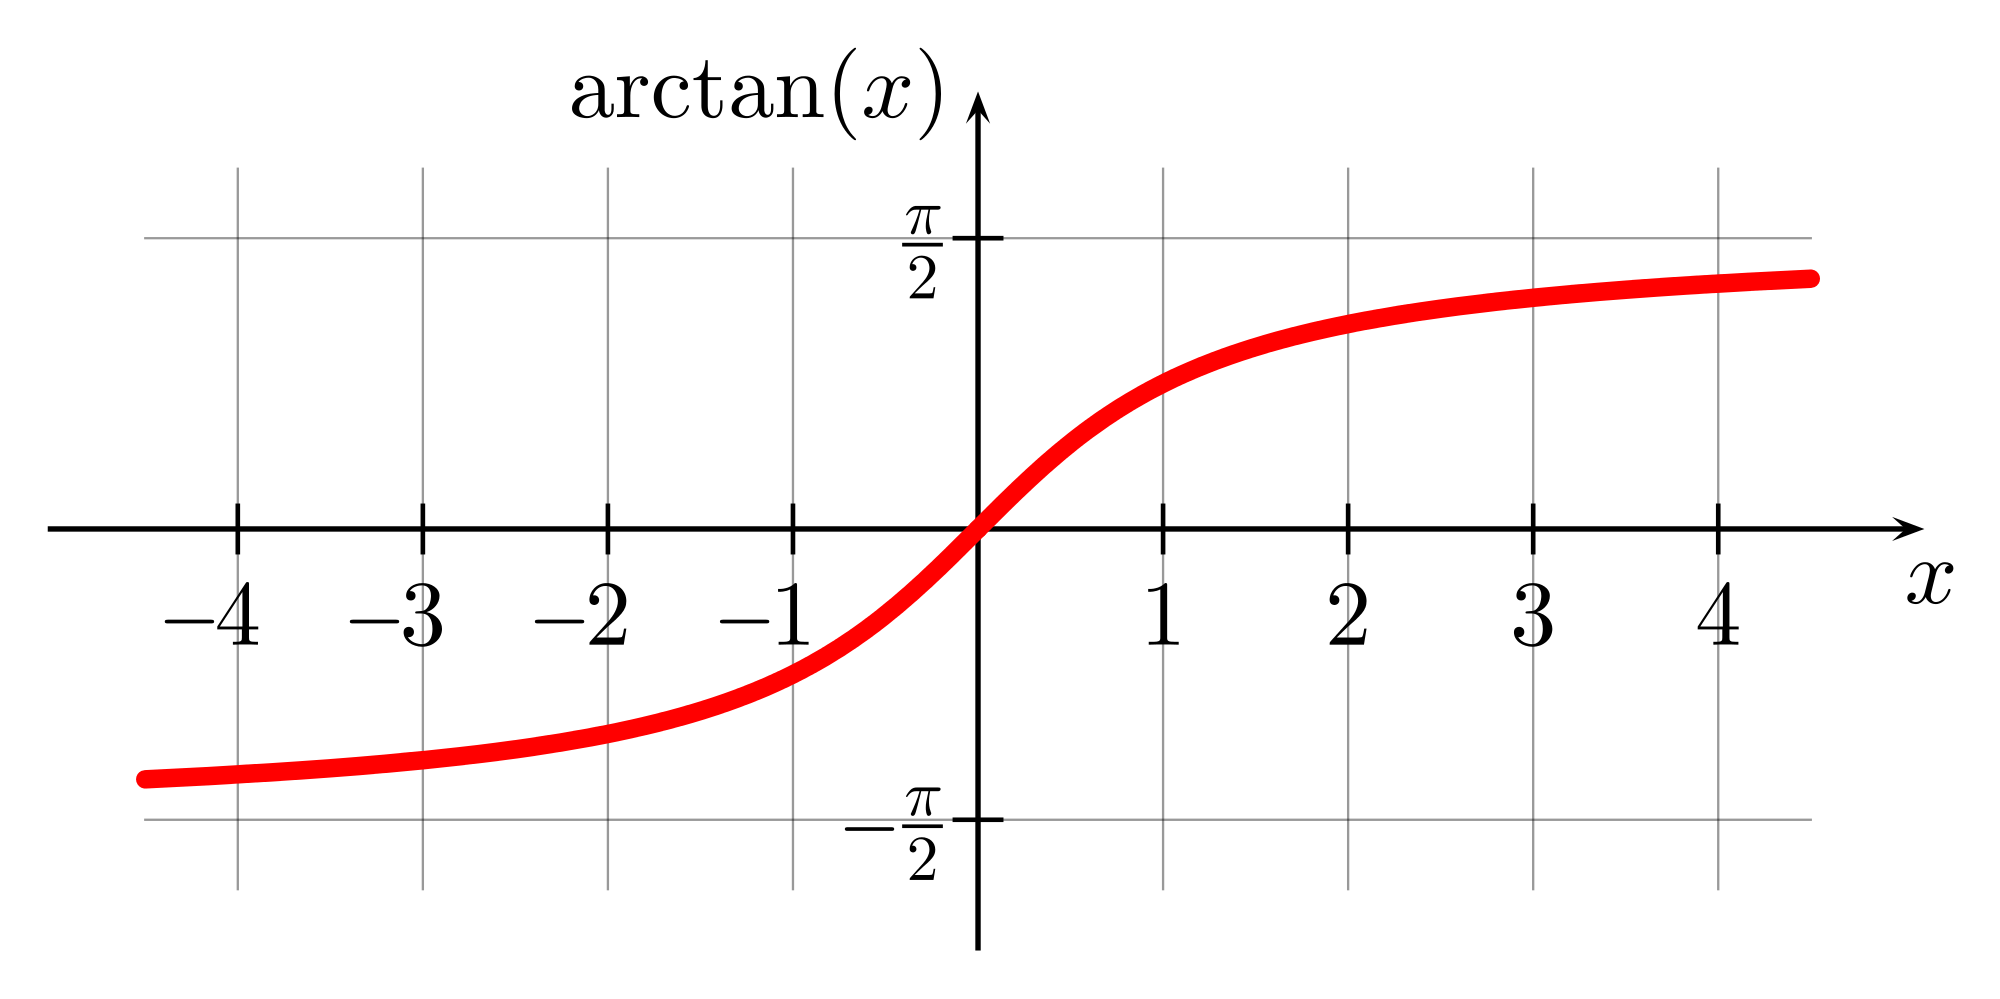 graph-of-arctangent-function